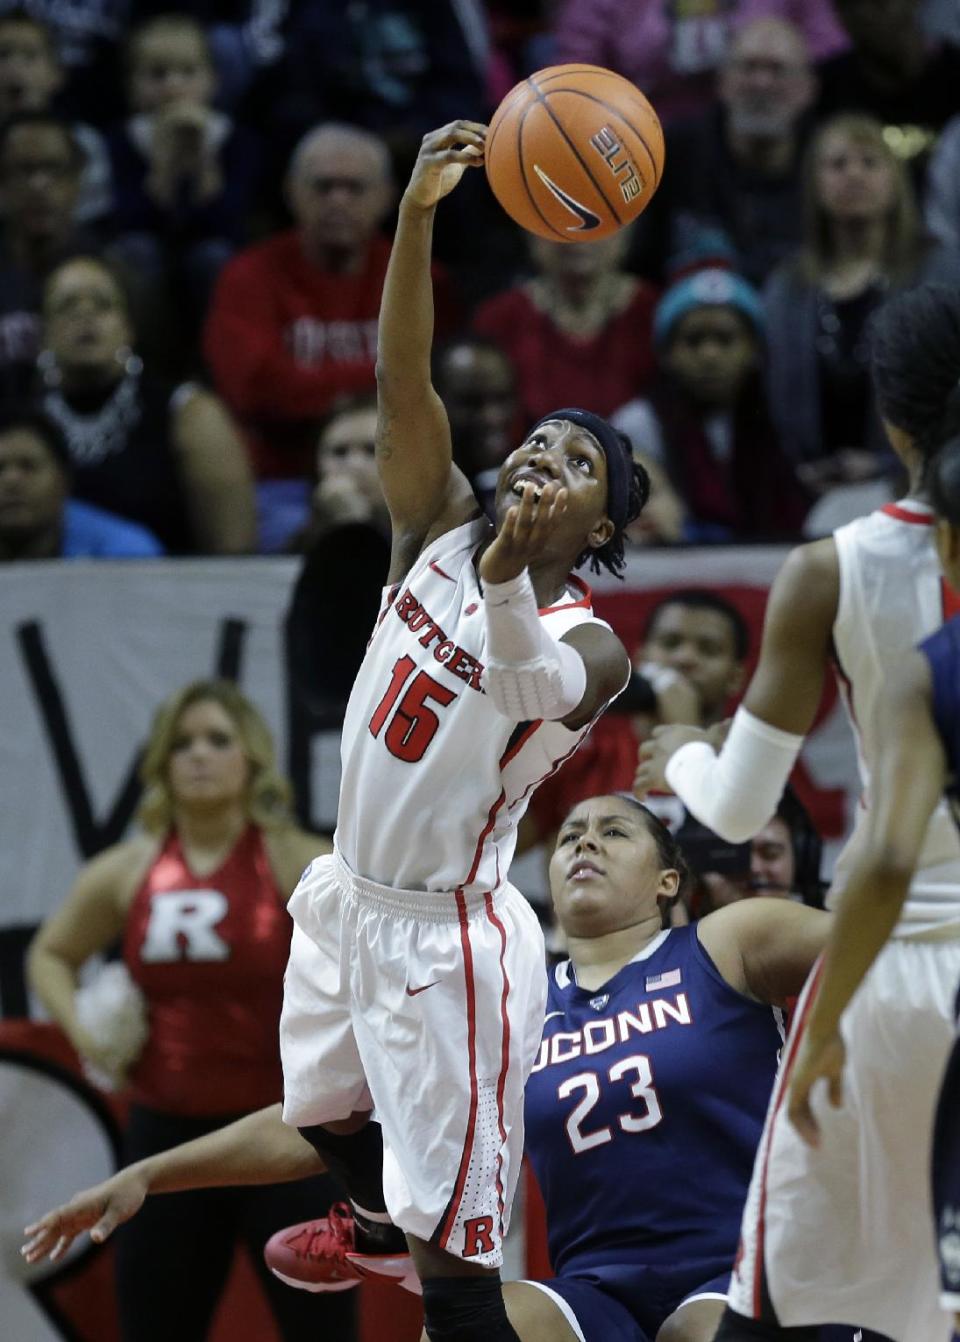 Rutgers guard Syessence Davis (15) takes a shot over her shoulder Connecticut defenders forward Kaleena Mosqueda-Lewis (23) falls during the first half of an NCAA college basketball game Sunday, Jan. 19, 2014, in Piscataway, N.J. (AP Photo/Mel Evans)